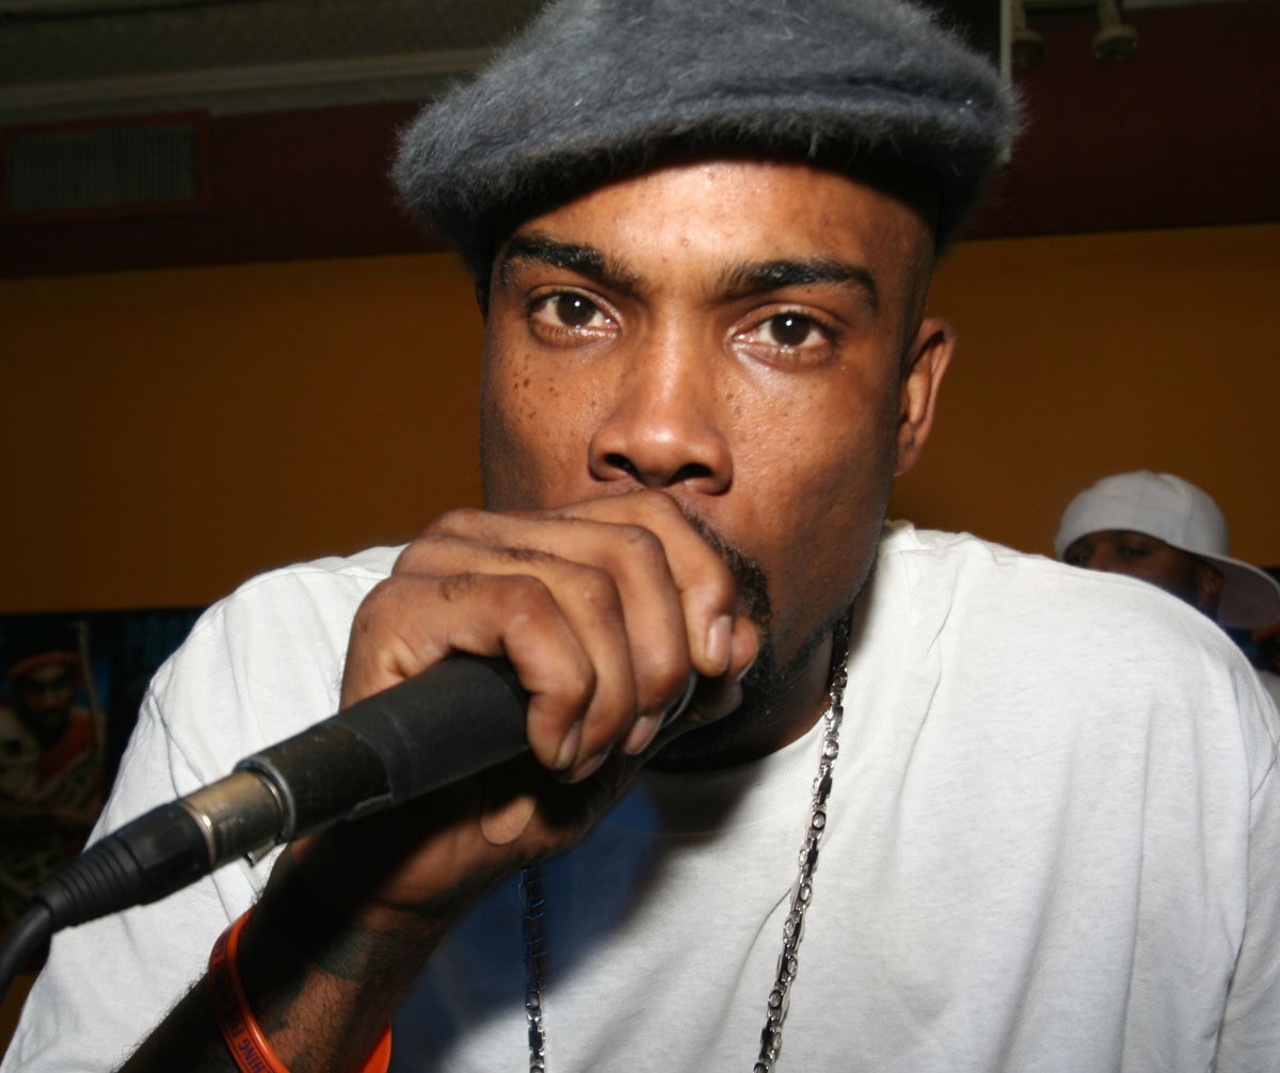 ProofDeShaun Dupree Holton, known professionally as Proof, was a founding member of rap group D12 with Eminem. Proof released several hits, including “Kurt Kobain,” “Trapped,” and “Oil Can Harry,” plus he appeared in the 2002 film 8 Mile as Lil’ Tic. Killed in 2006 at age 32, Proof is buried in Woodlawn Cemetery in Detroit.